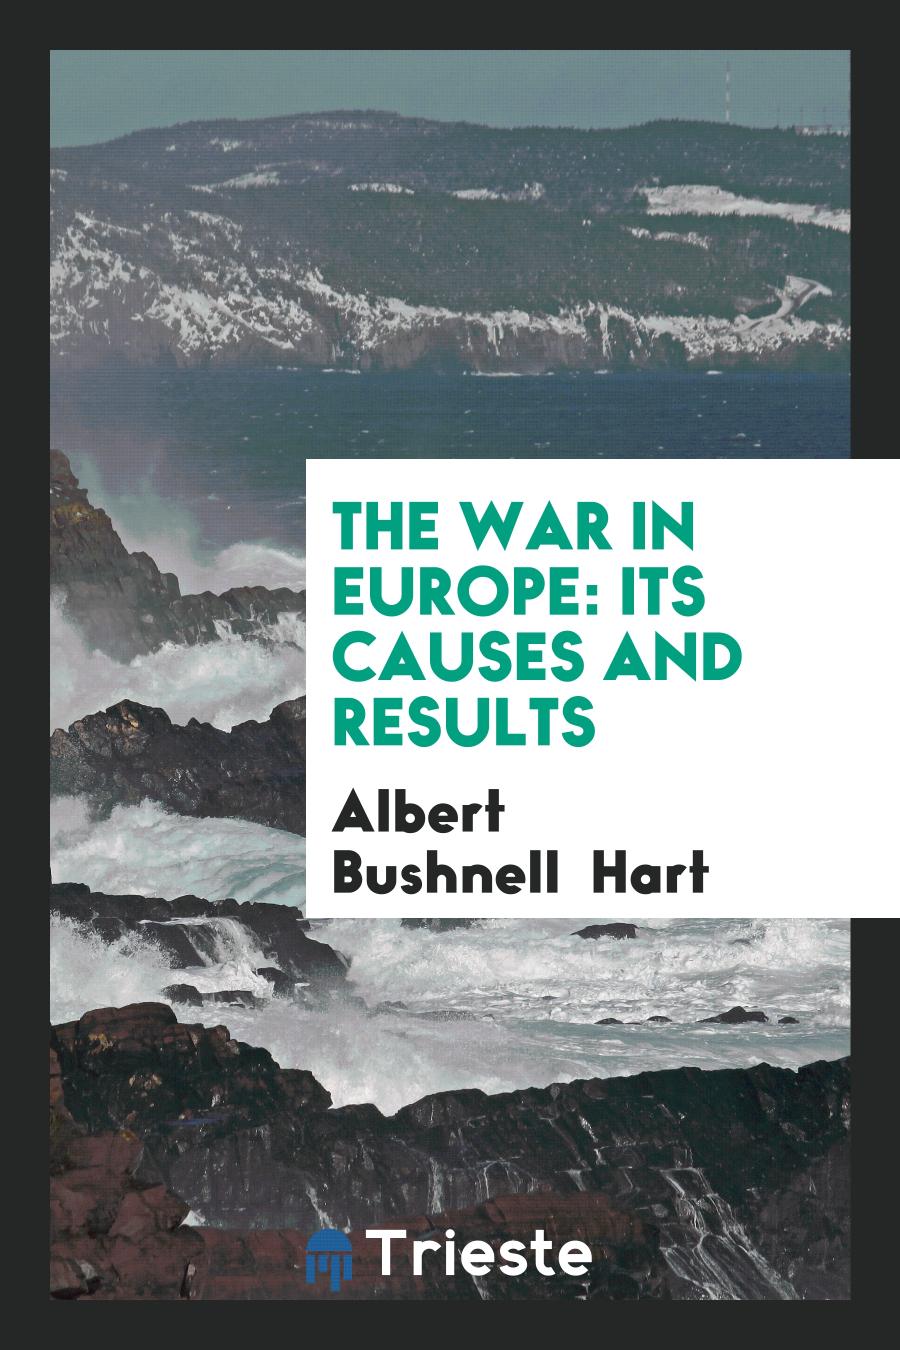 The War in Europe: Its Causes and Results